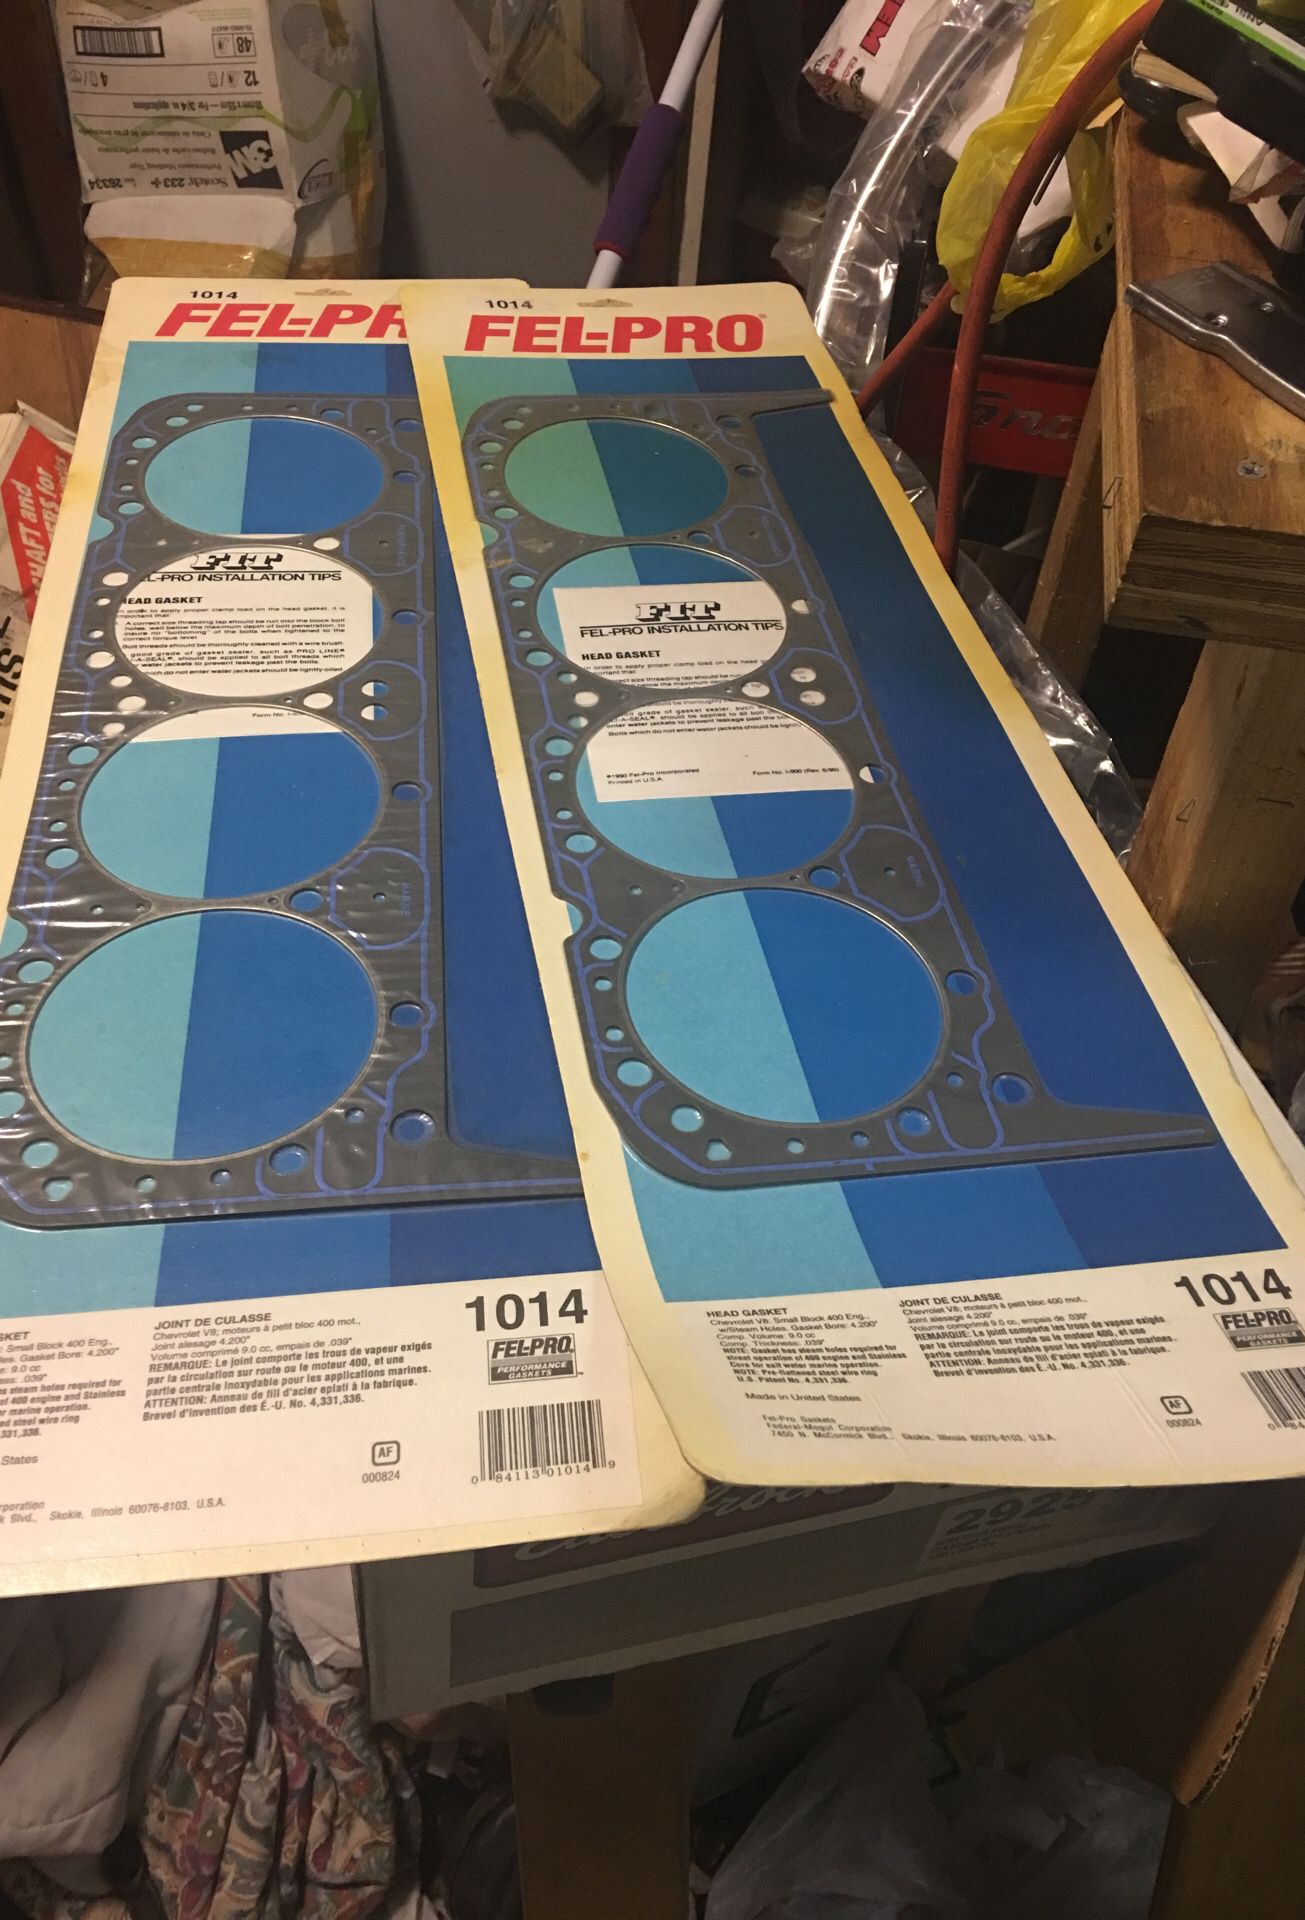 Brand new head gasket for 400 Chevy with steam hole made by fel-pro part number 1014 $40.00